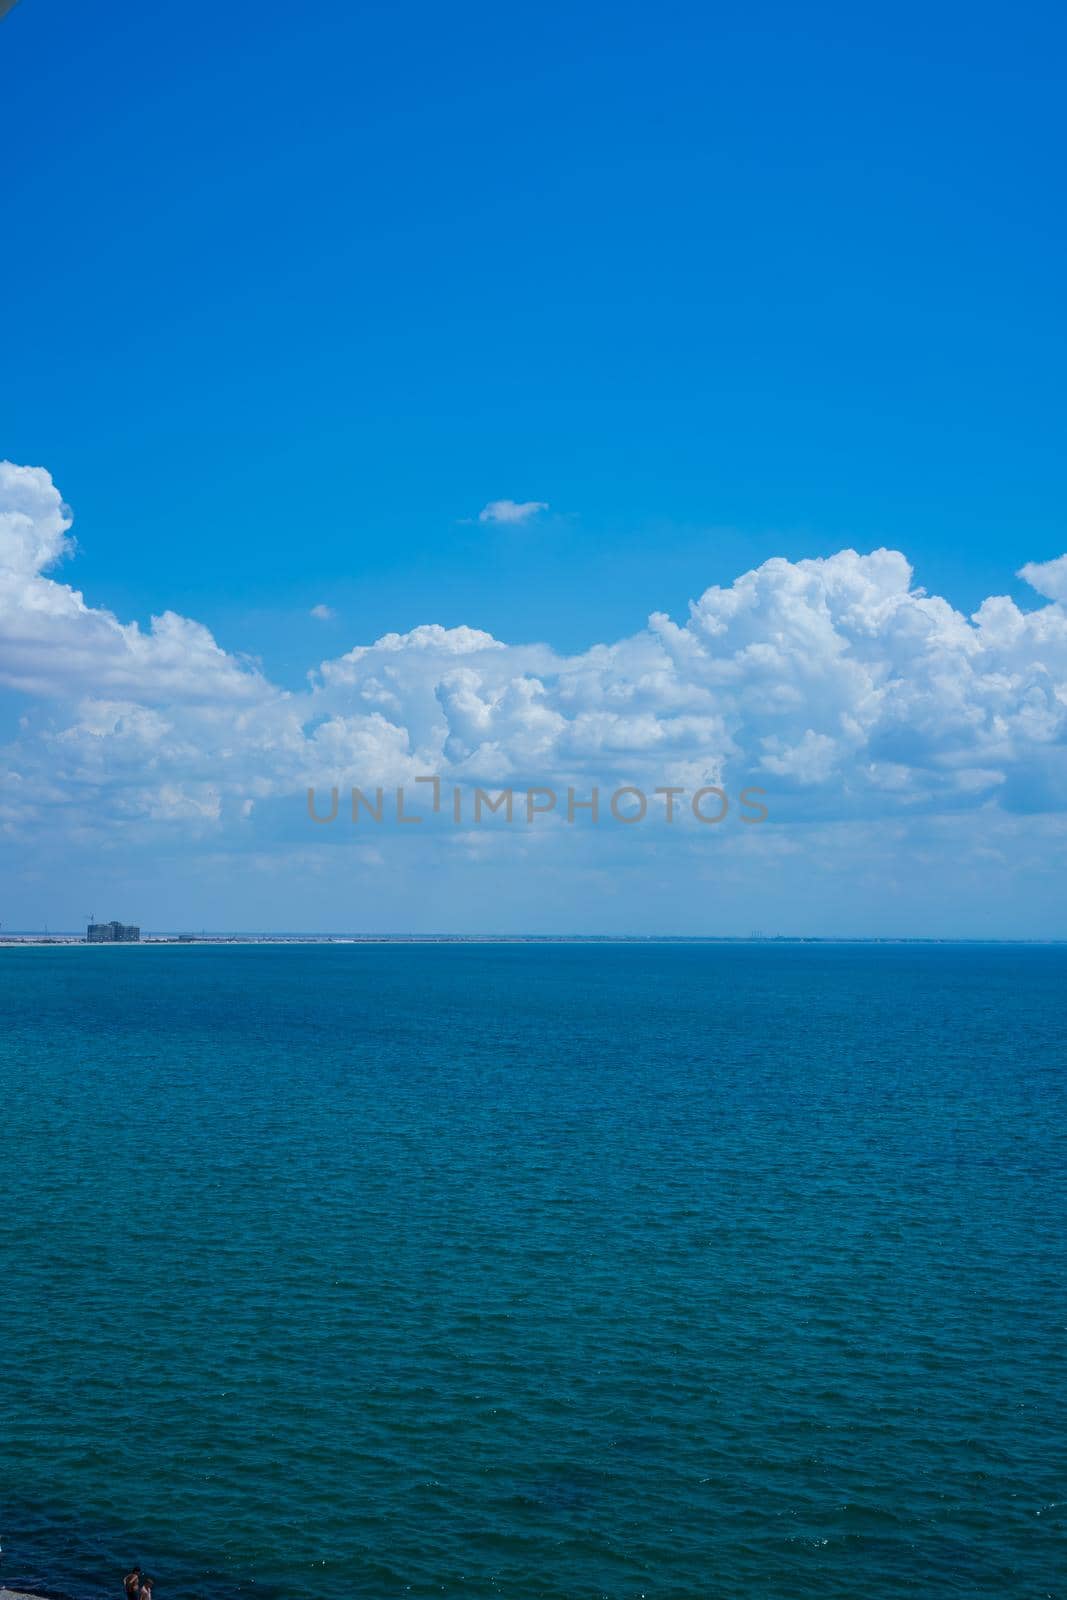 Seascape with water surface and sky with clouds by Vvicca